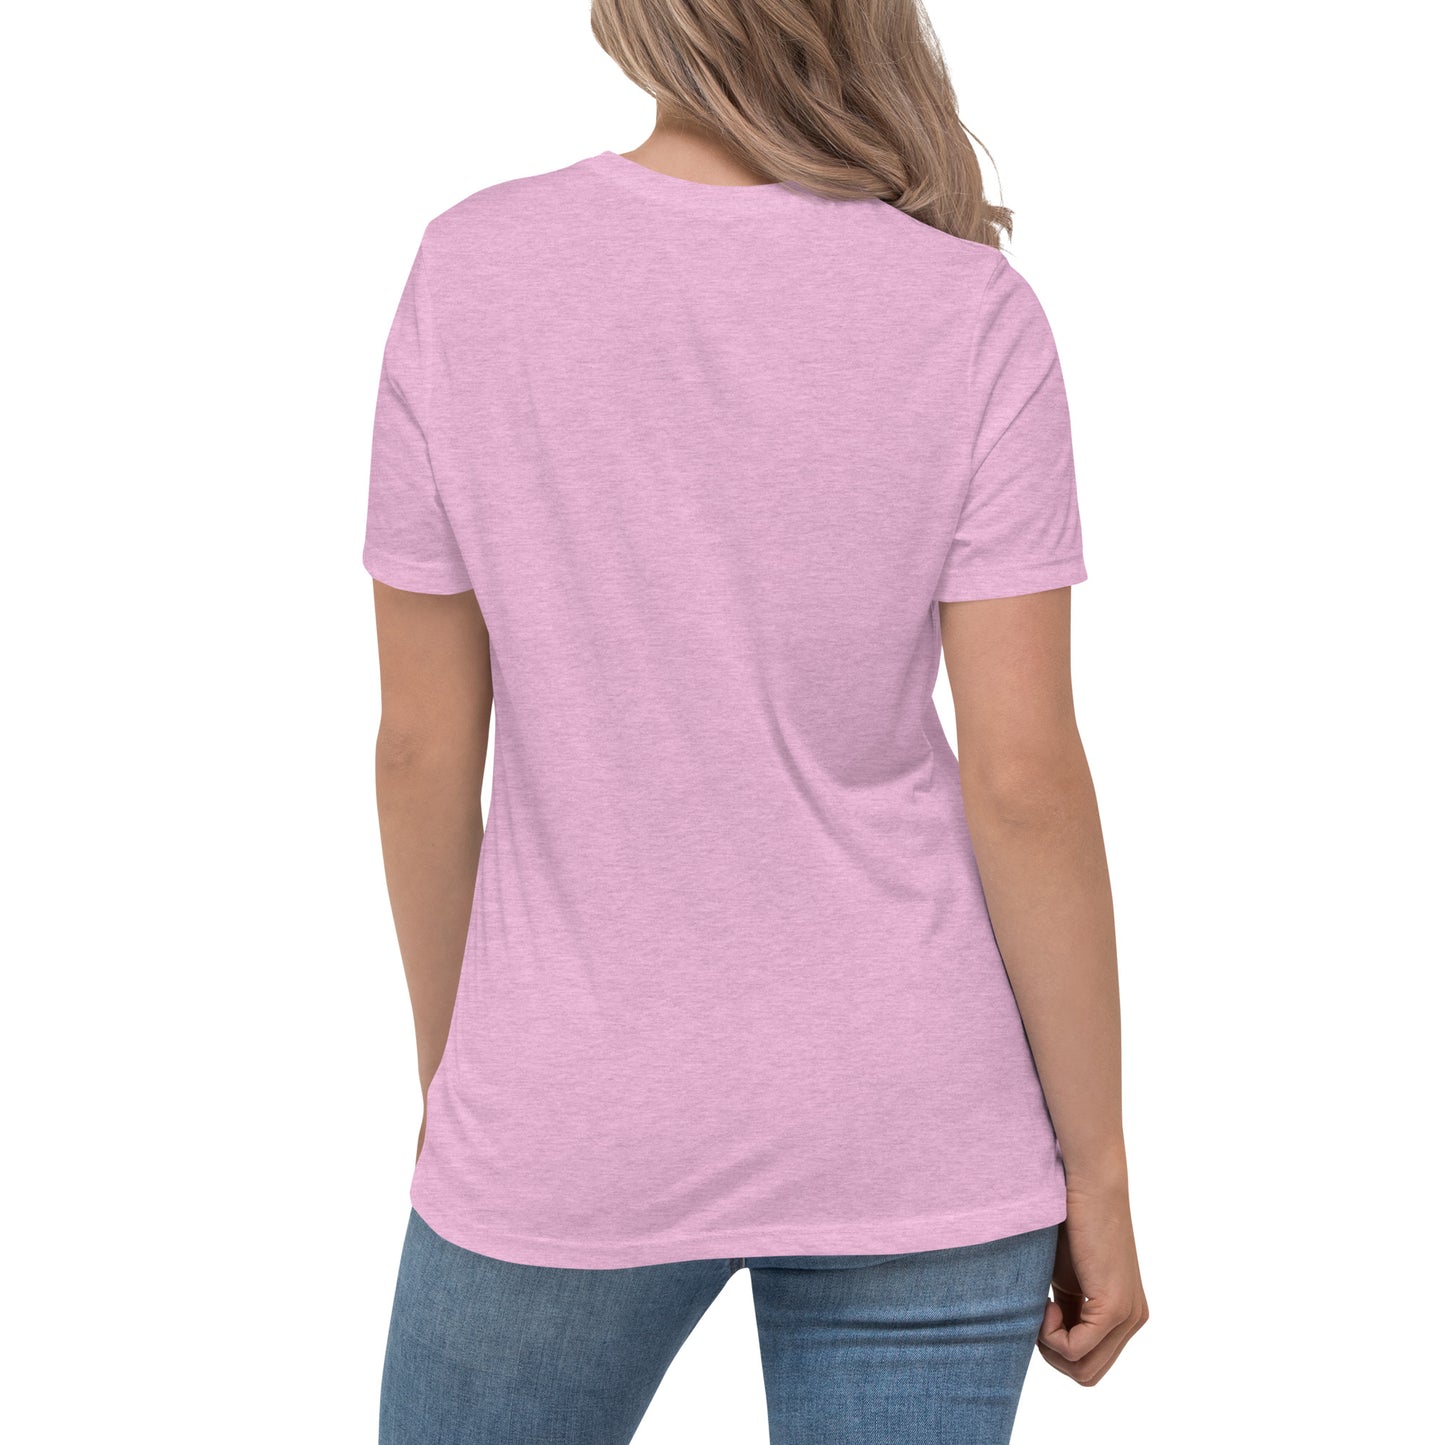 Women's Relaxed Soft & Smooth Premium Quality T-Shirt Personalize Customize Bride Bridesmaids Wedding or Bachelorette Party Design by IOBI Original Apparel